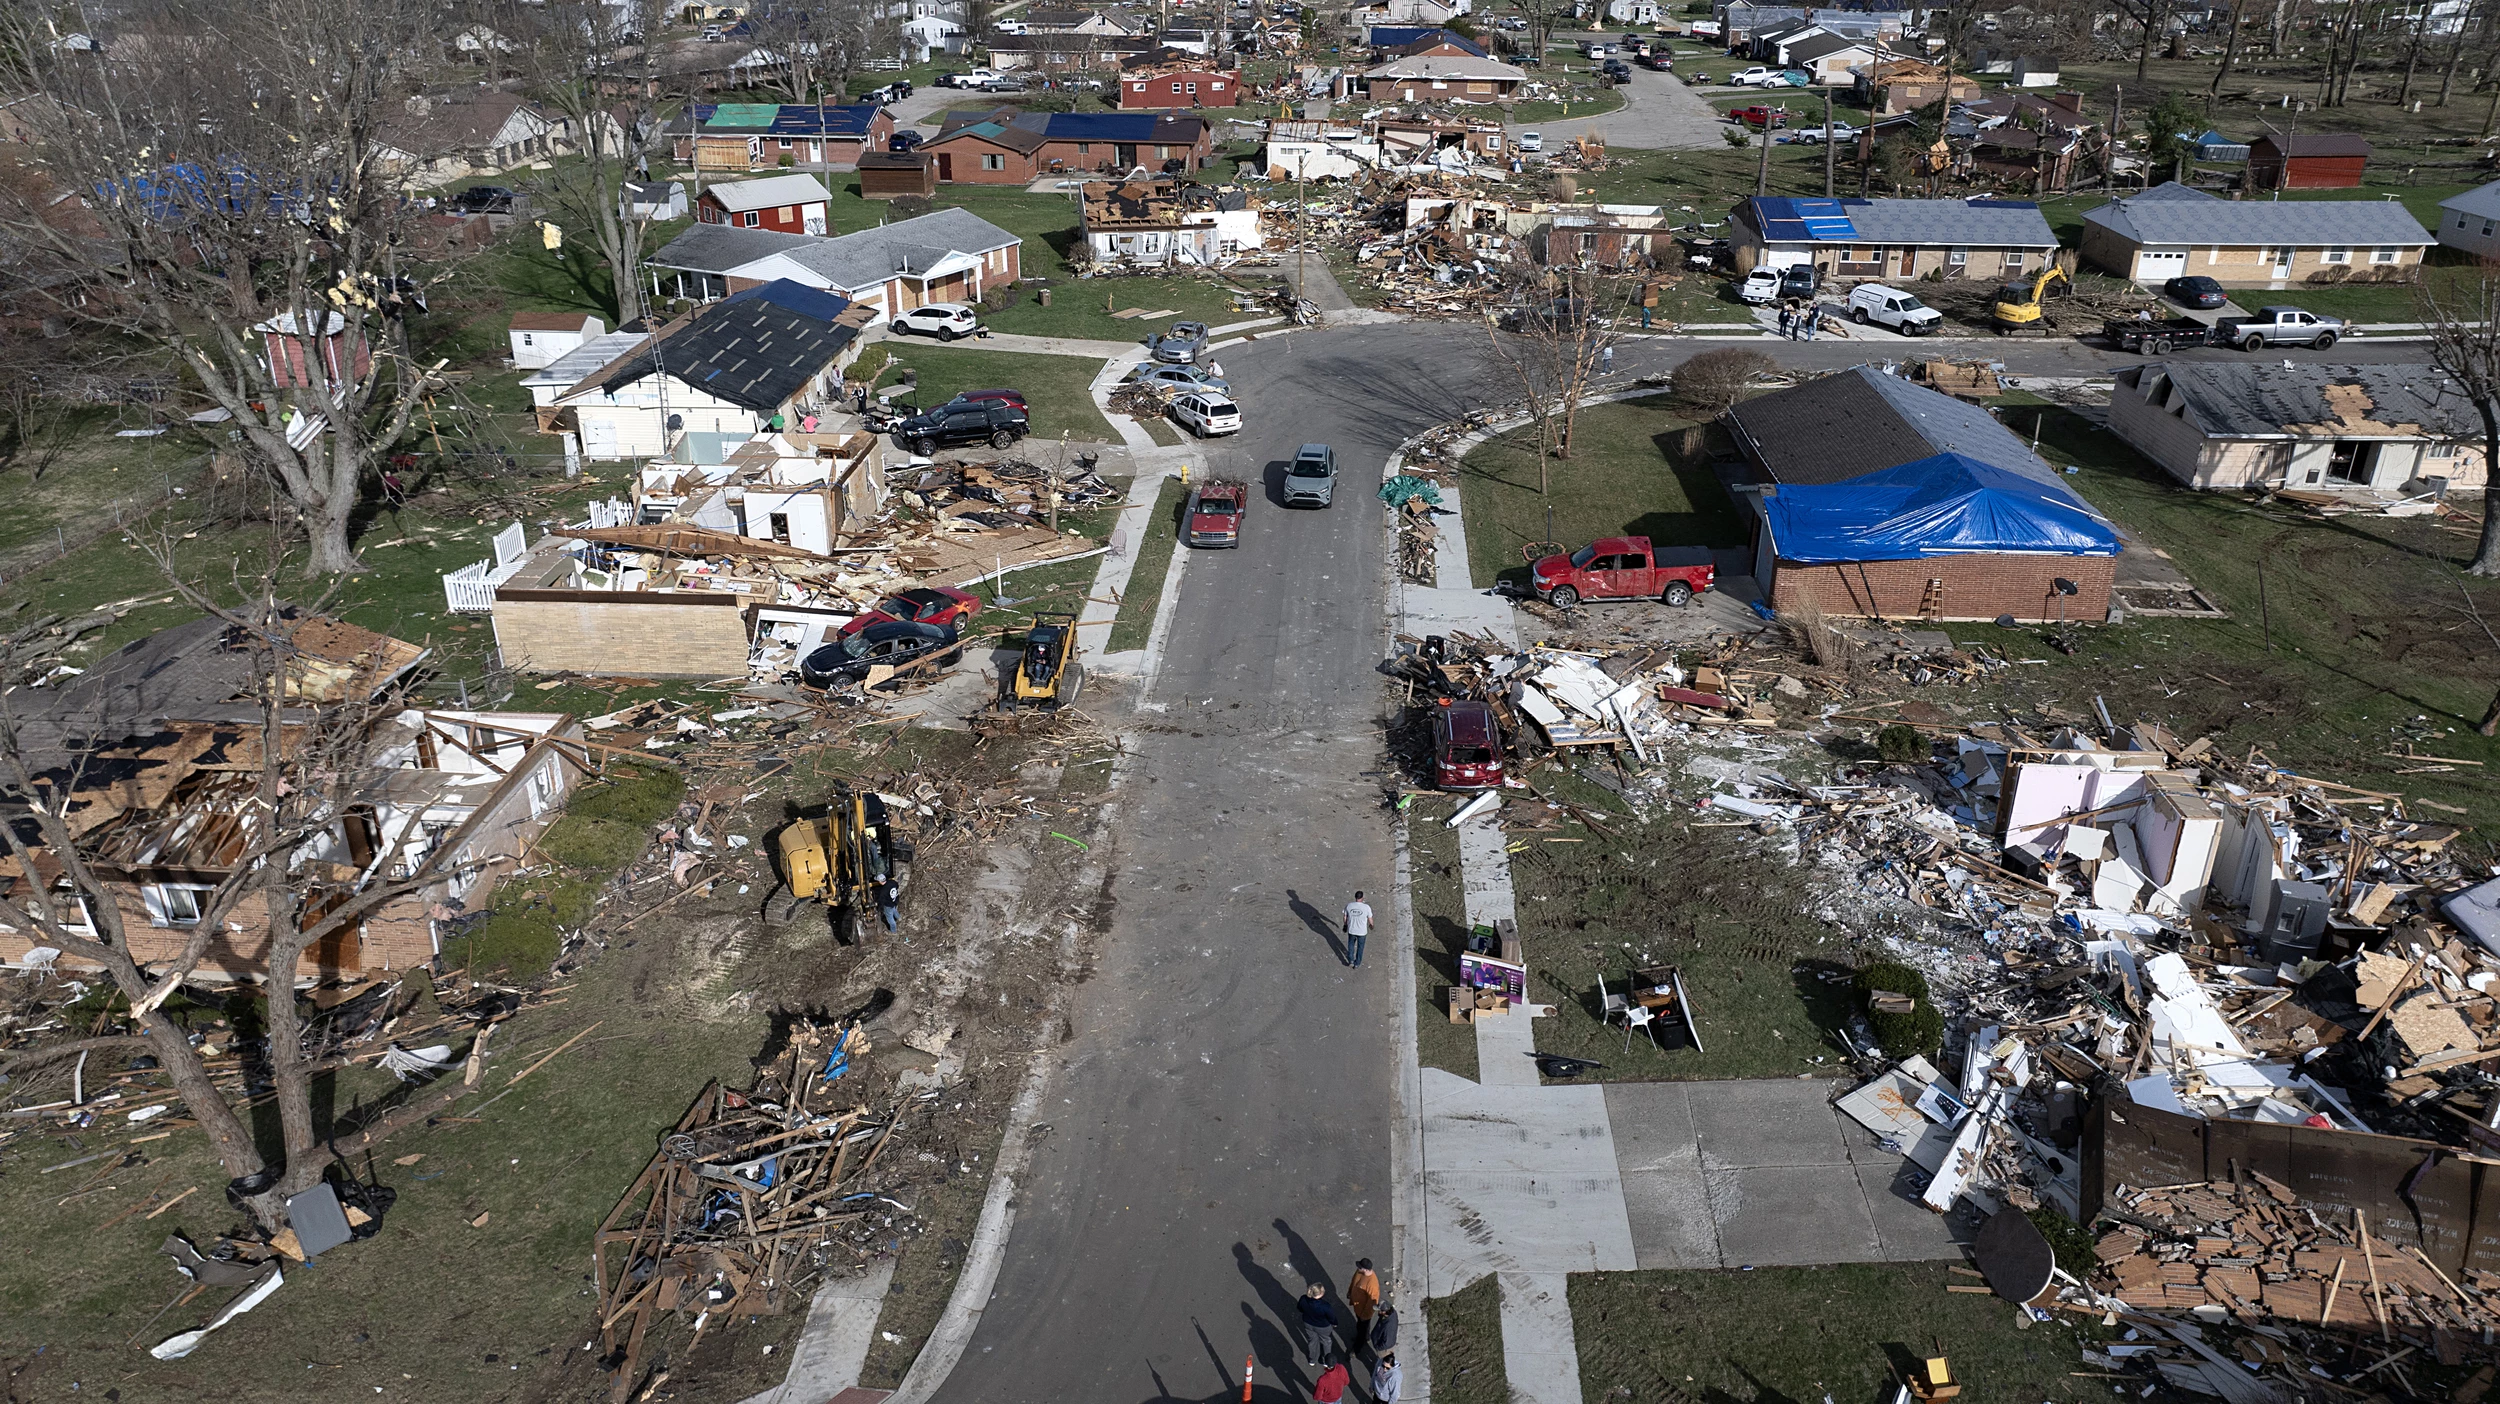 Tornadoes Rip Through Midwest, Leaving Damage And Deaths In Ohio And Indiana